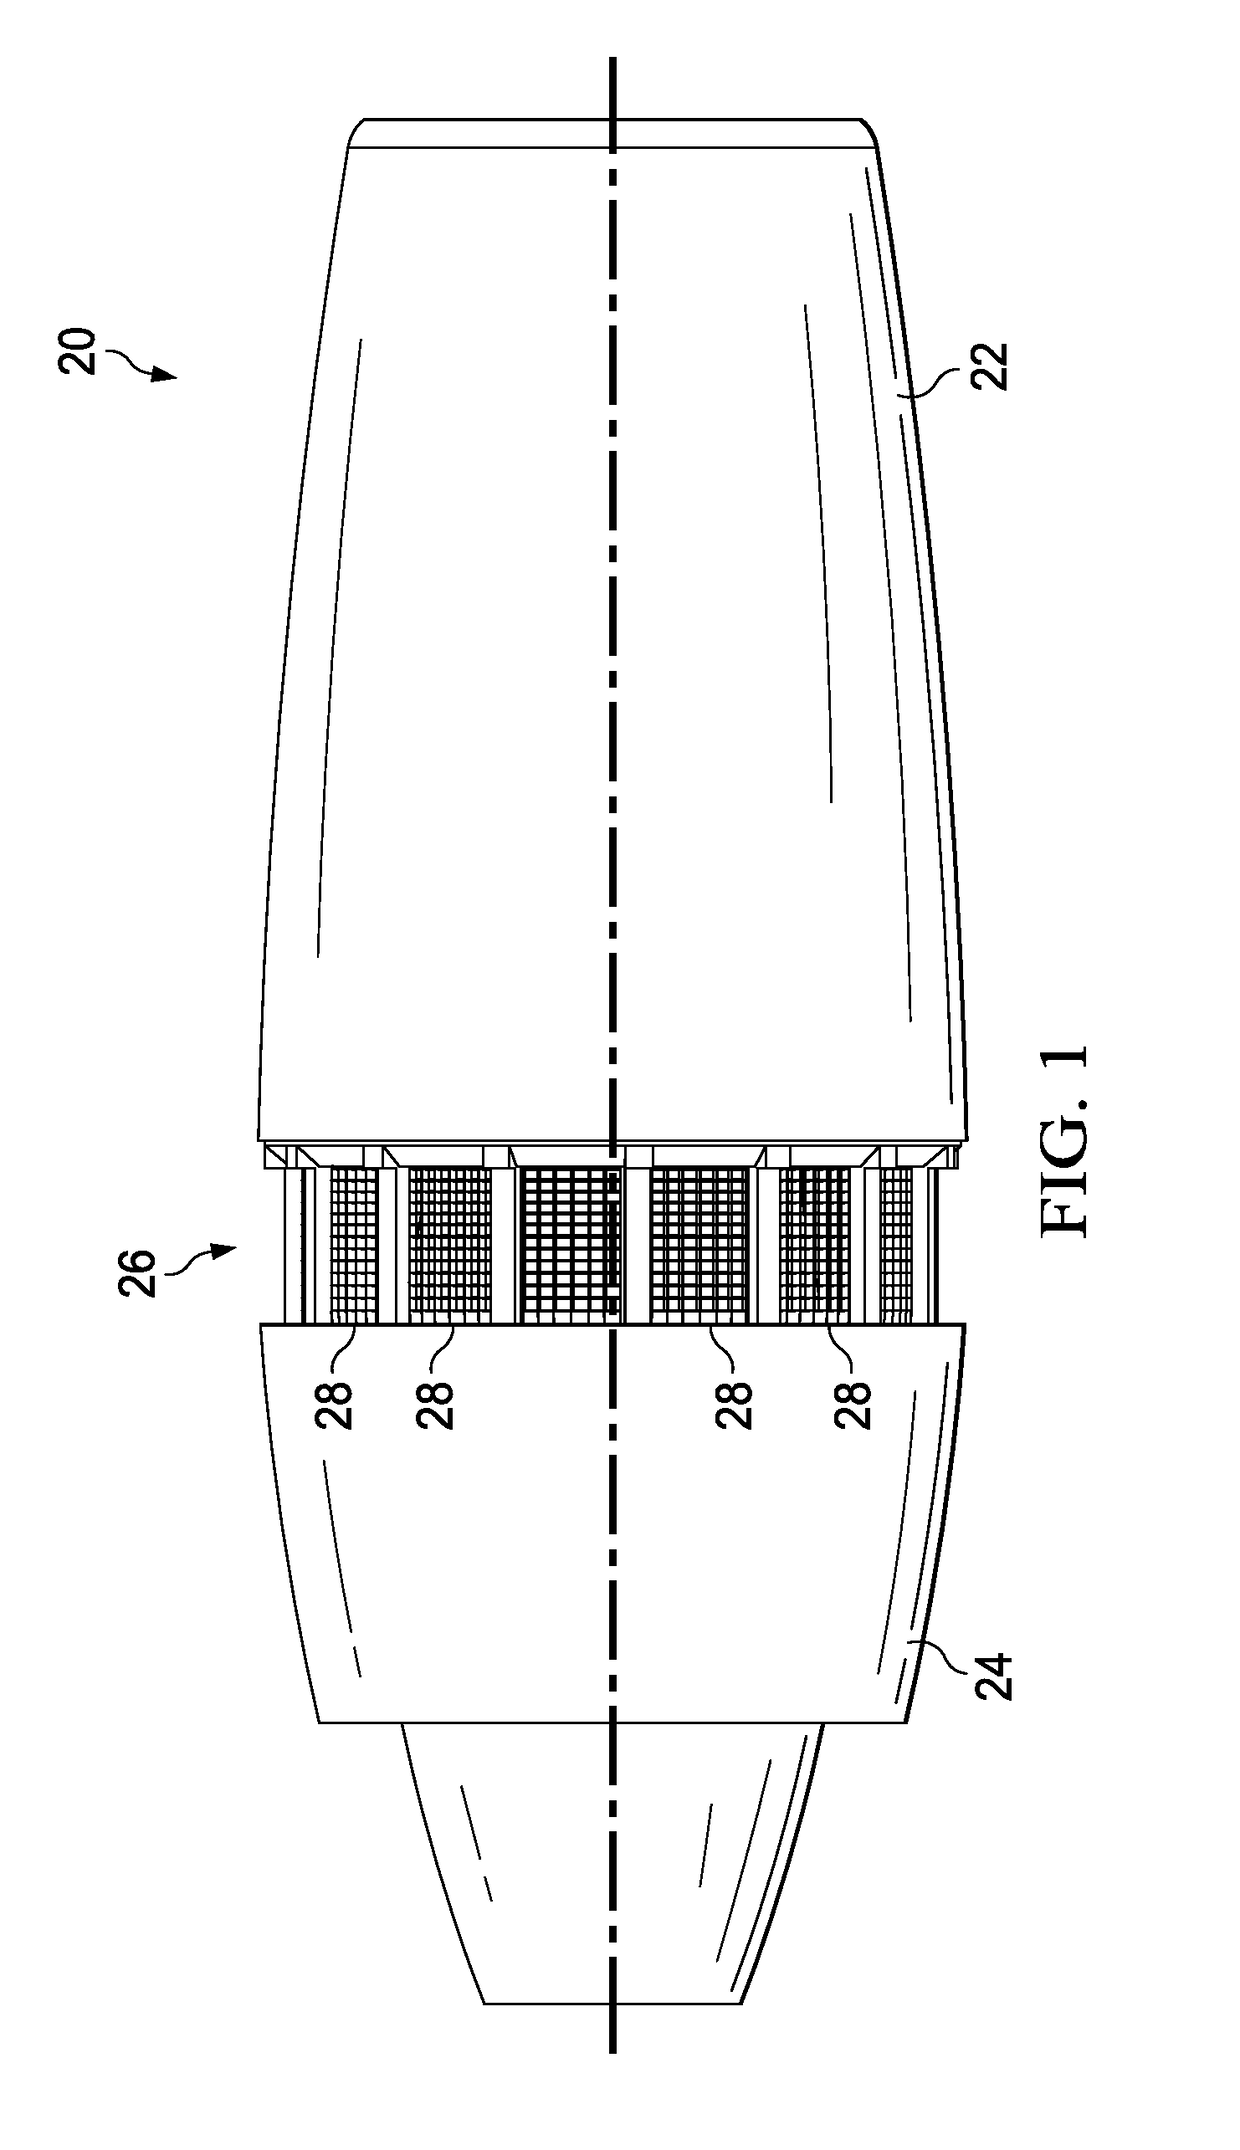 Thermoformed cascades for jet engine thrust reversers